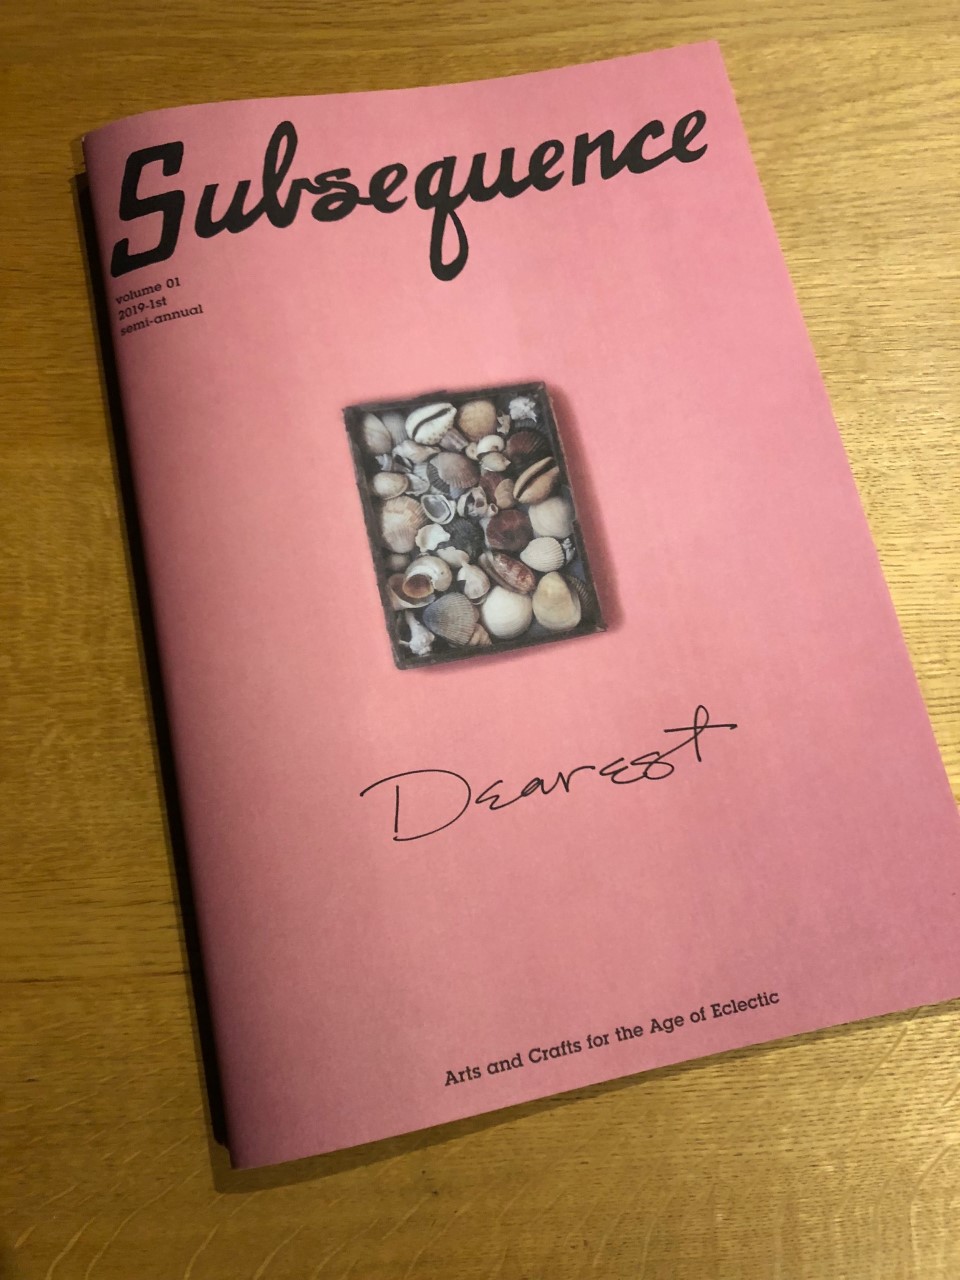 subsequence magazine